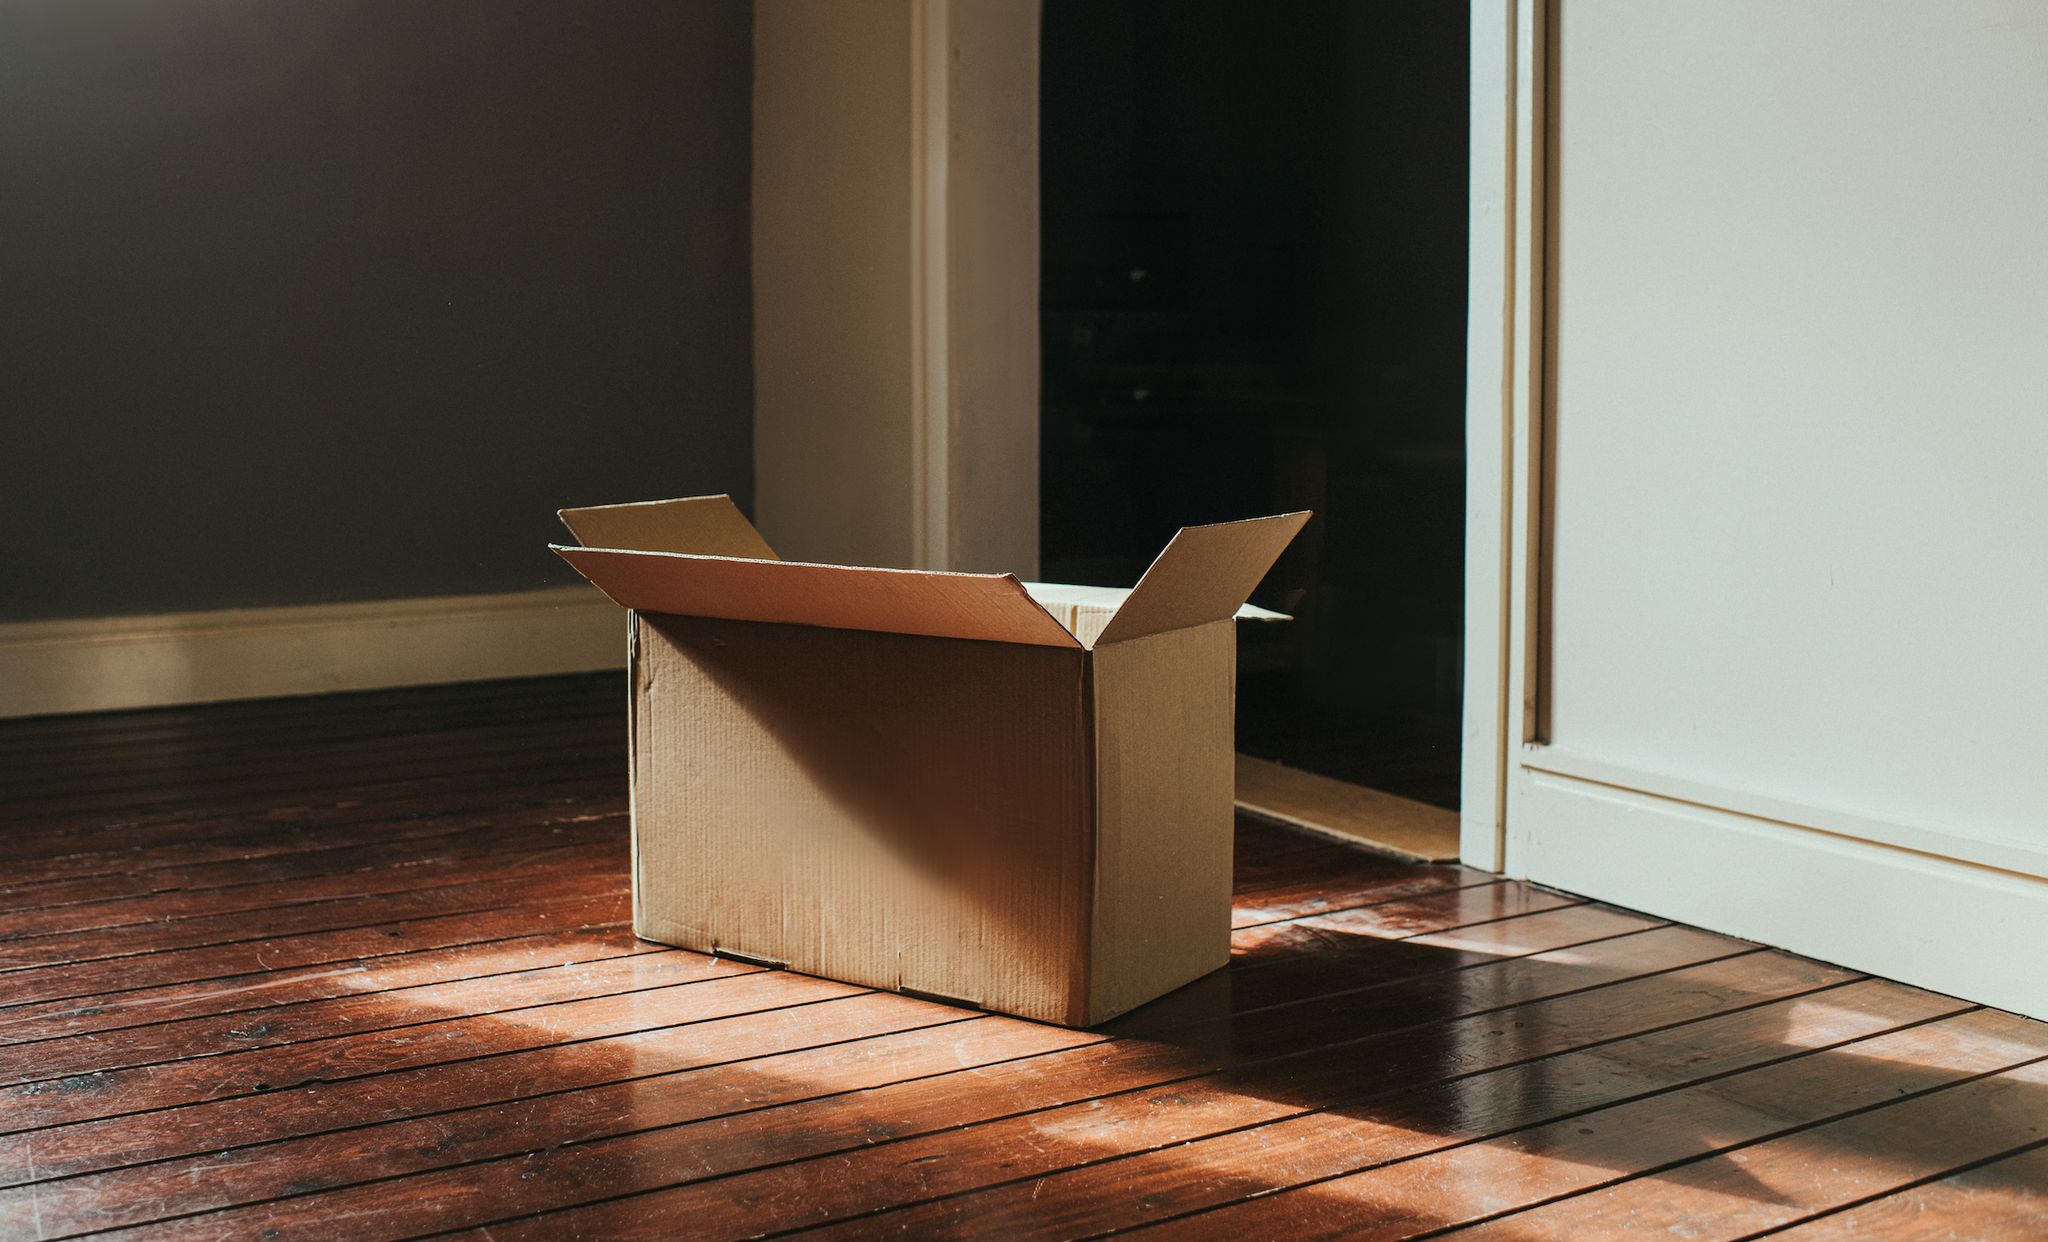 a single, plain, cardboard box sits on a dark wooden floor in a domestic room sun shines through the window creating flares and shadows room is empty and sparse wall provides a space for copy